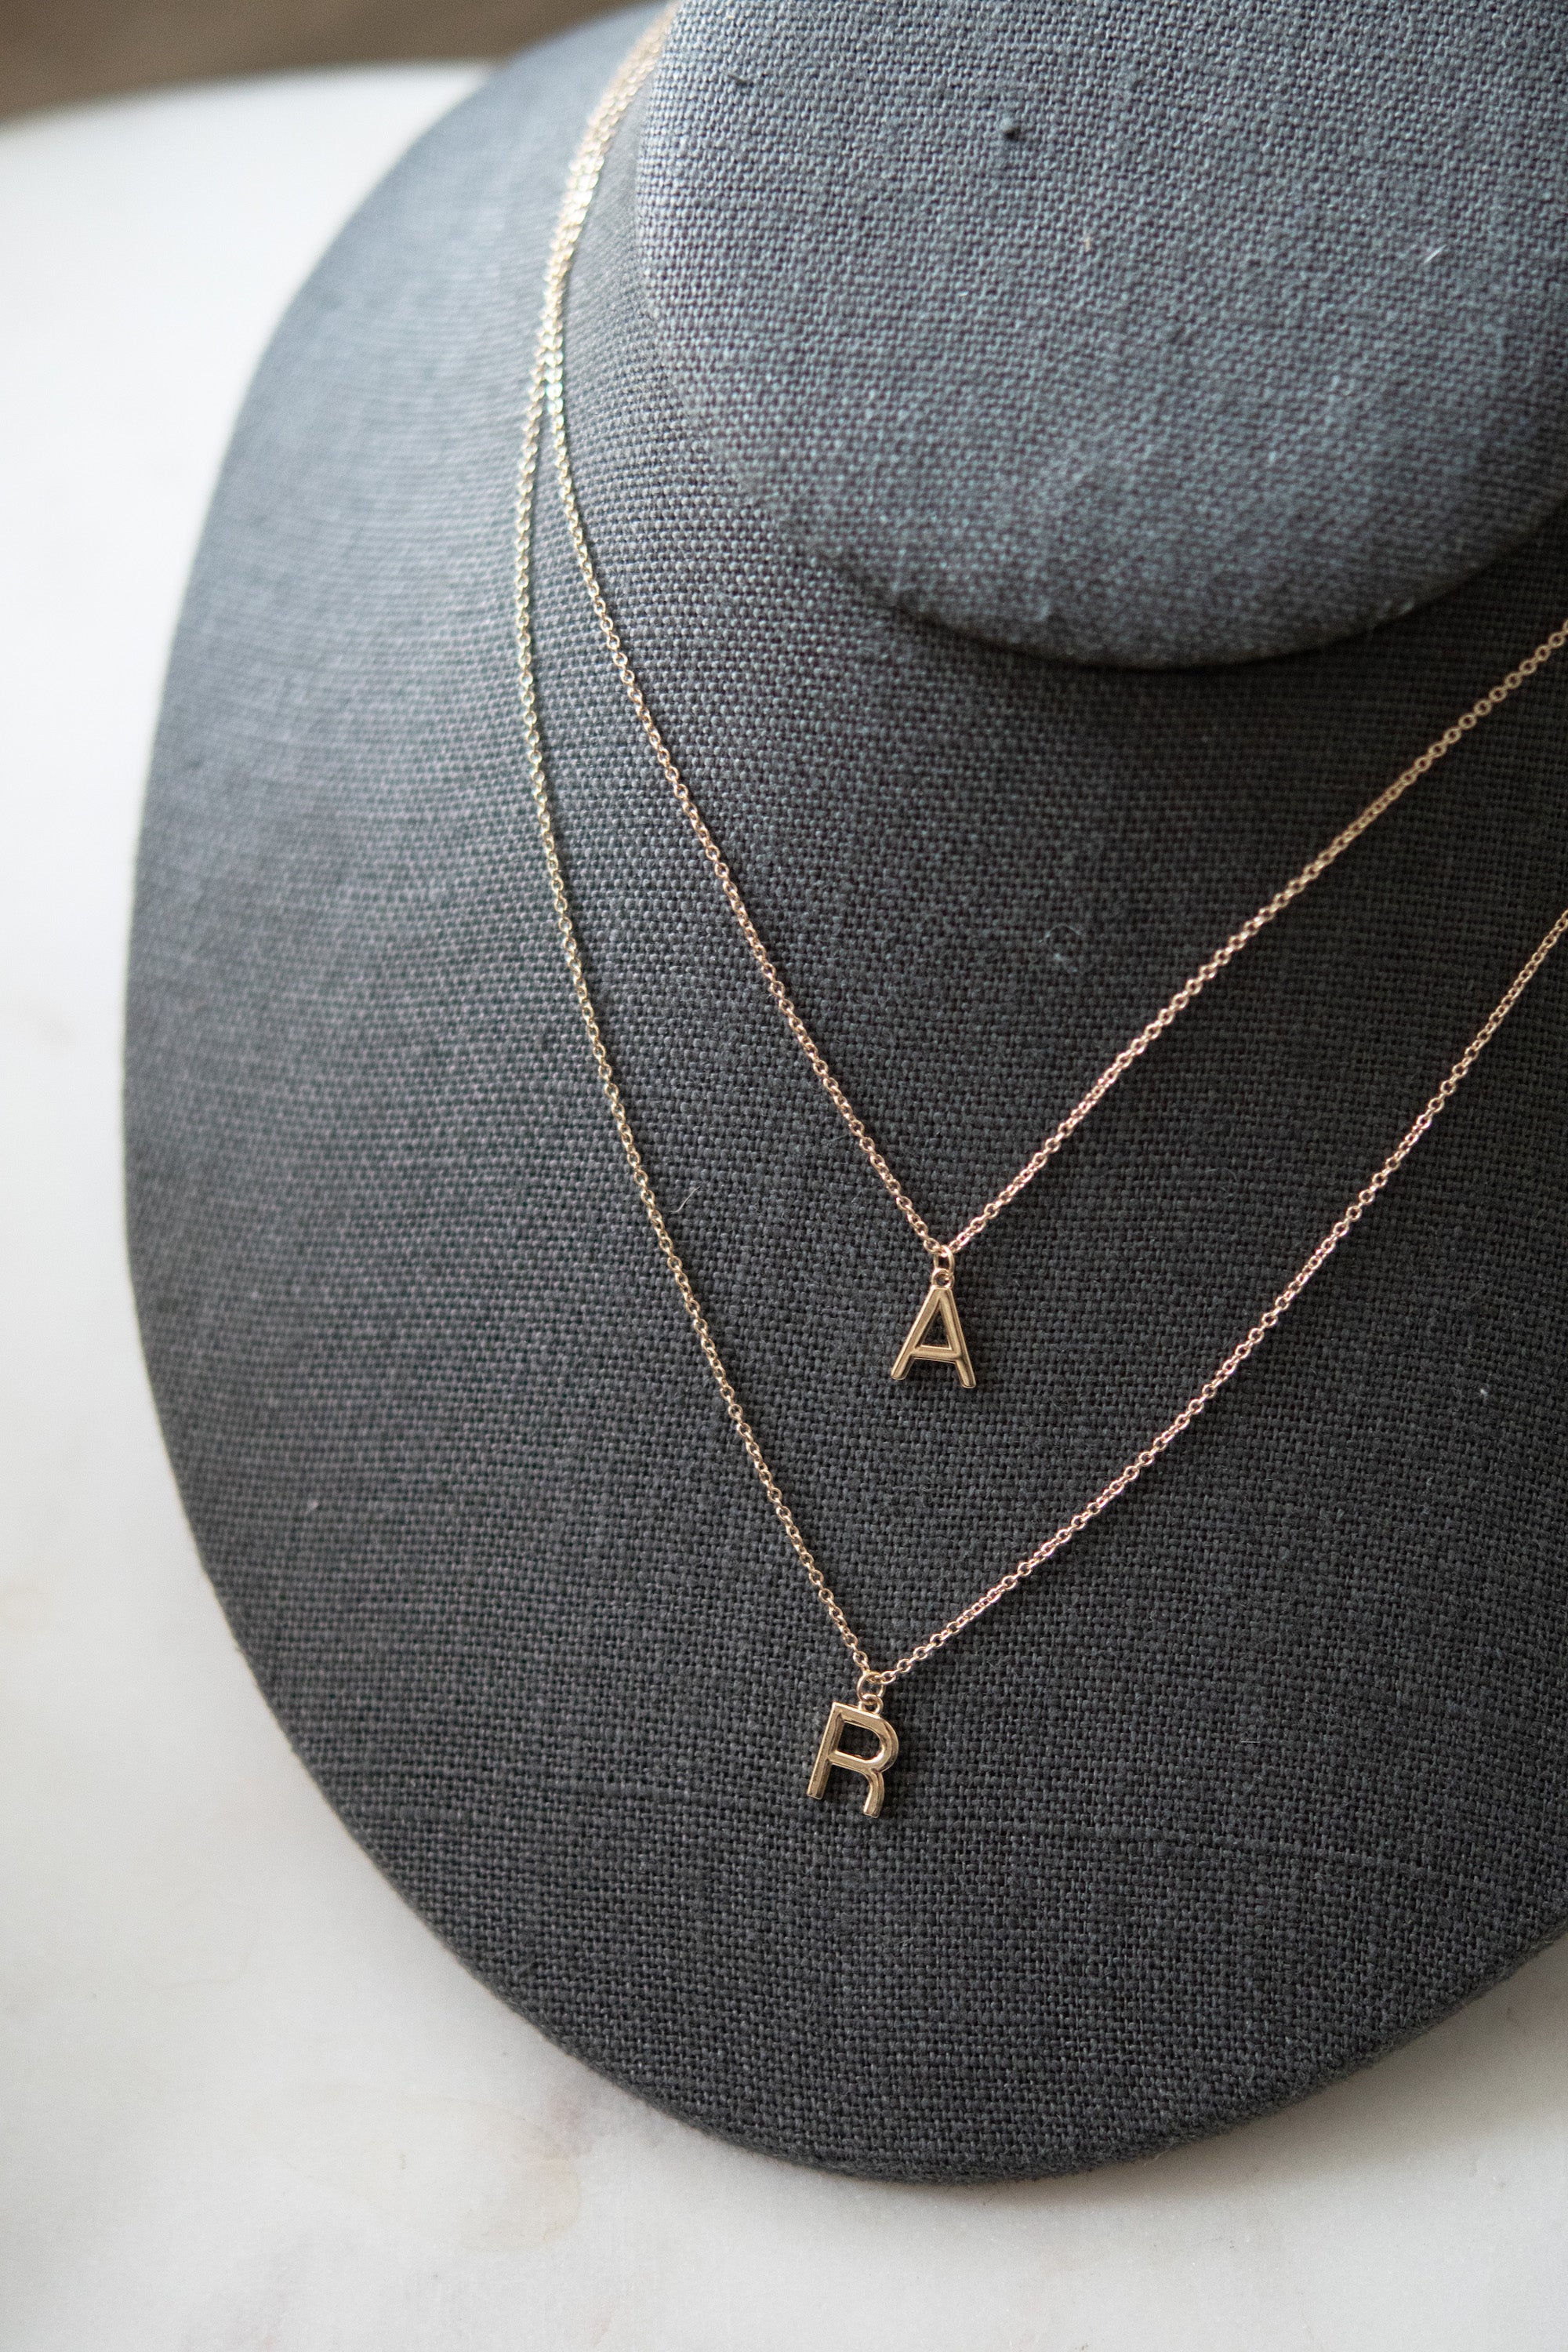 Initial Necklace / Sideways Letter Necklace / Necklace With Letter – M E I  R A K O